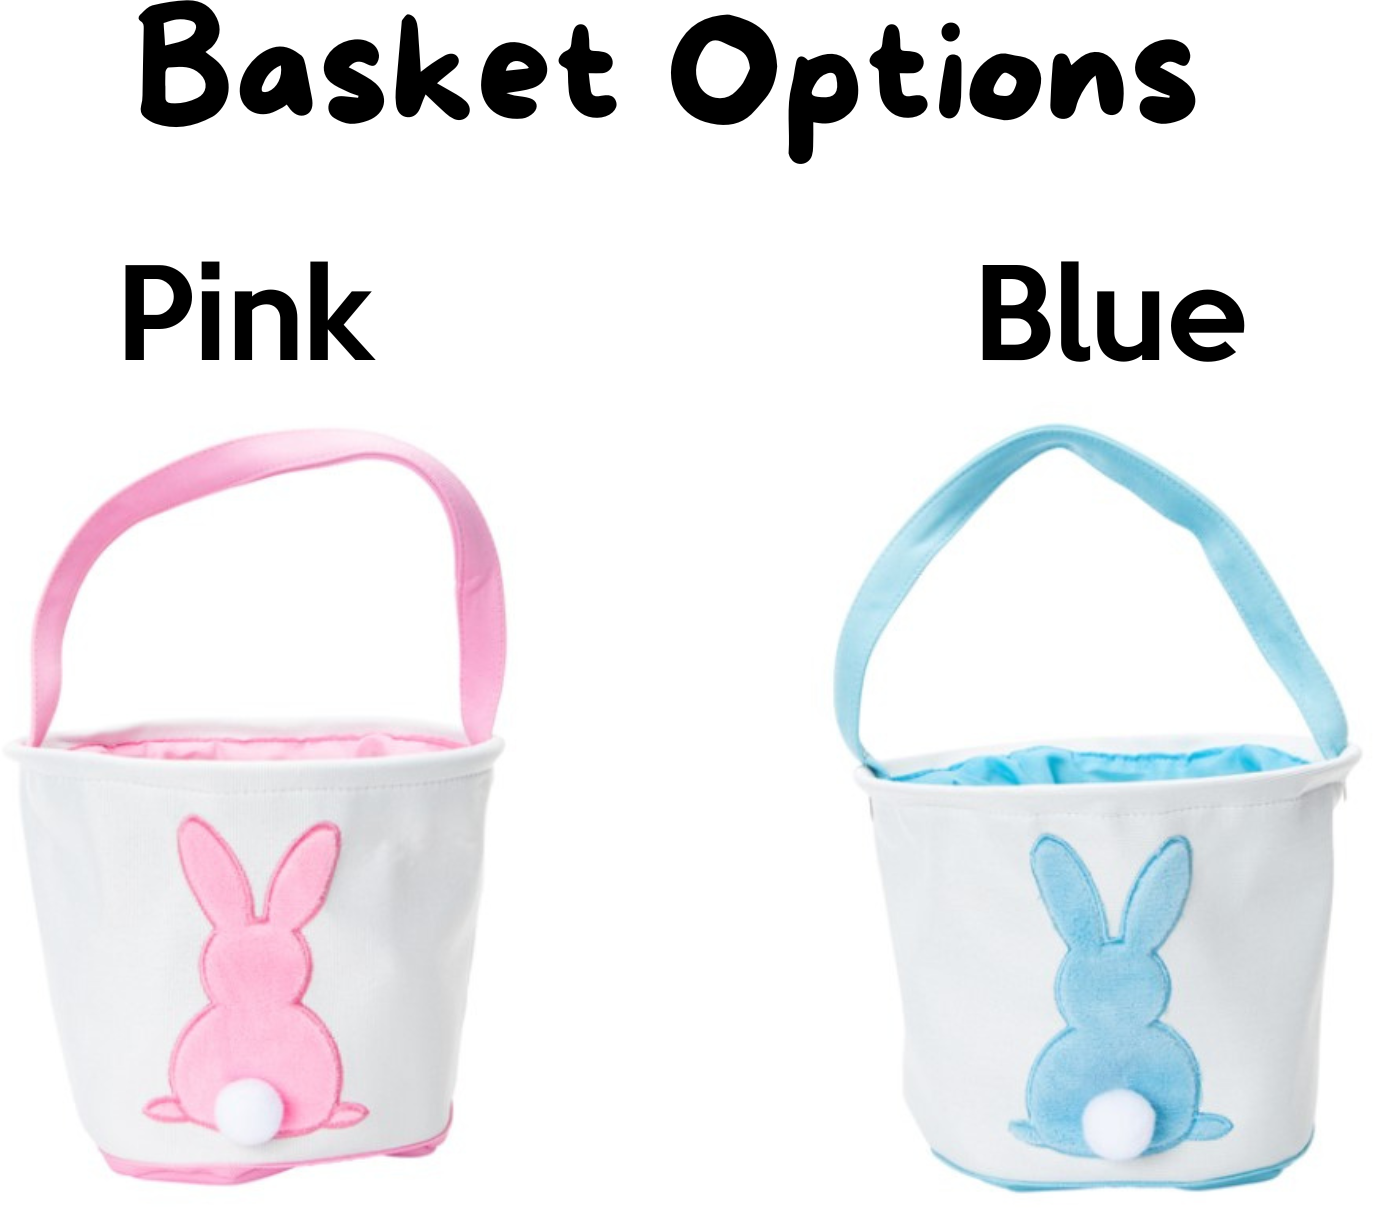 Easter Basket -Embroidered Bunny with Cotton Tail